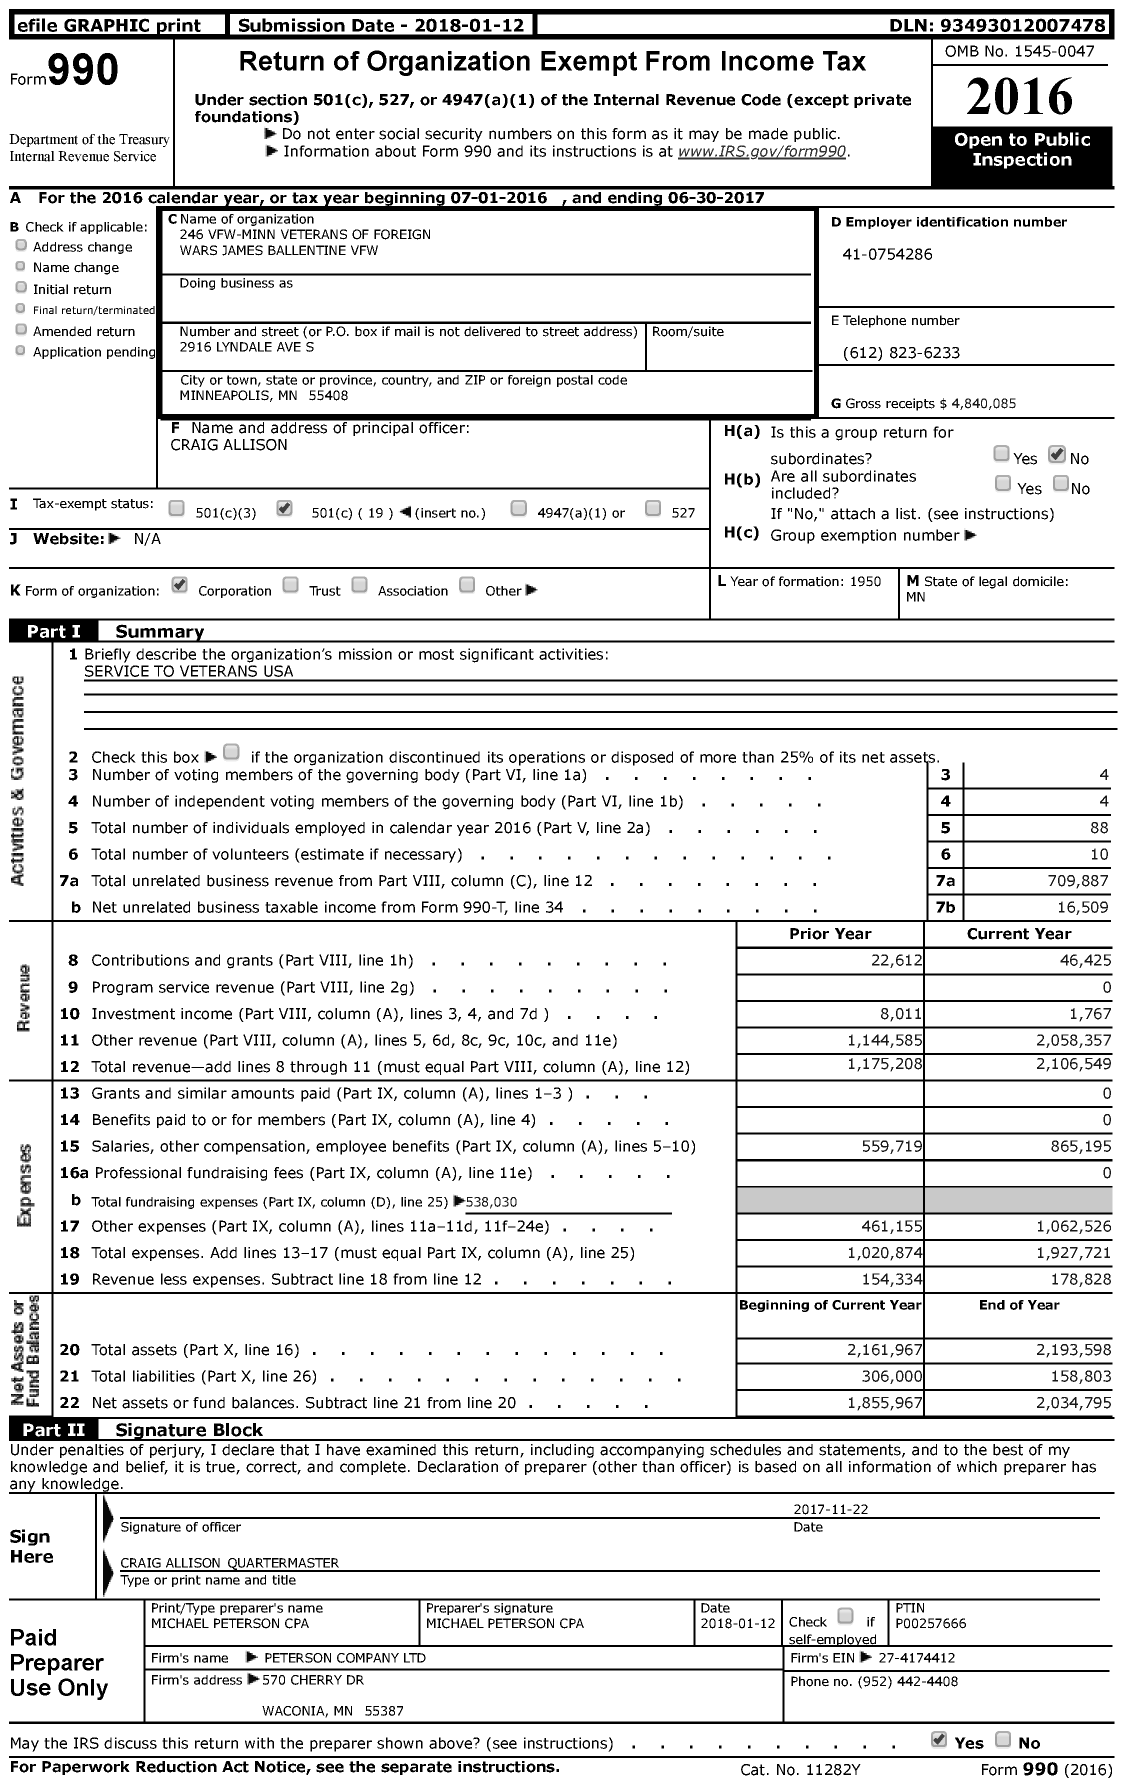 Image of first page of 2016 Form 990 for MN VFW - 246 Vfw-Minn Veterans of Foreign Wars James Ballentine VFW